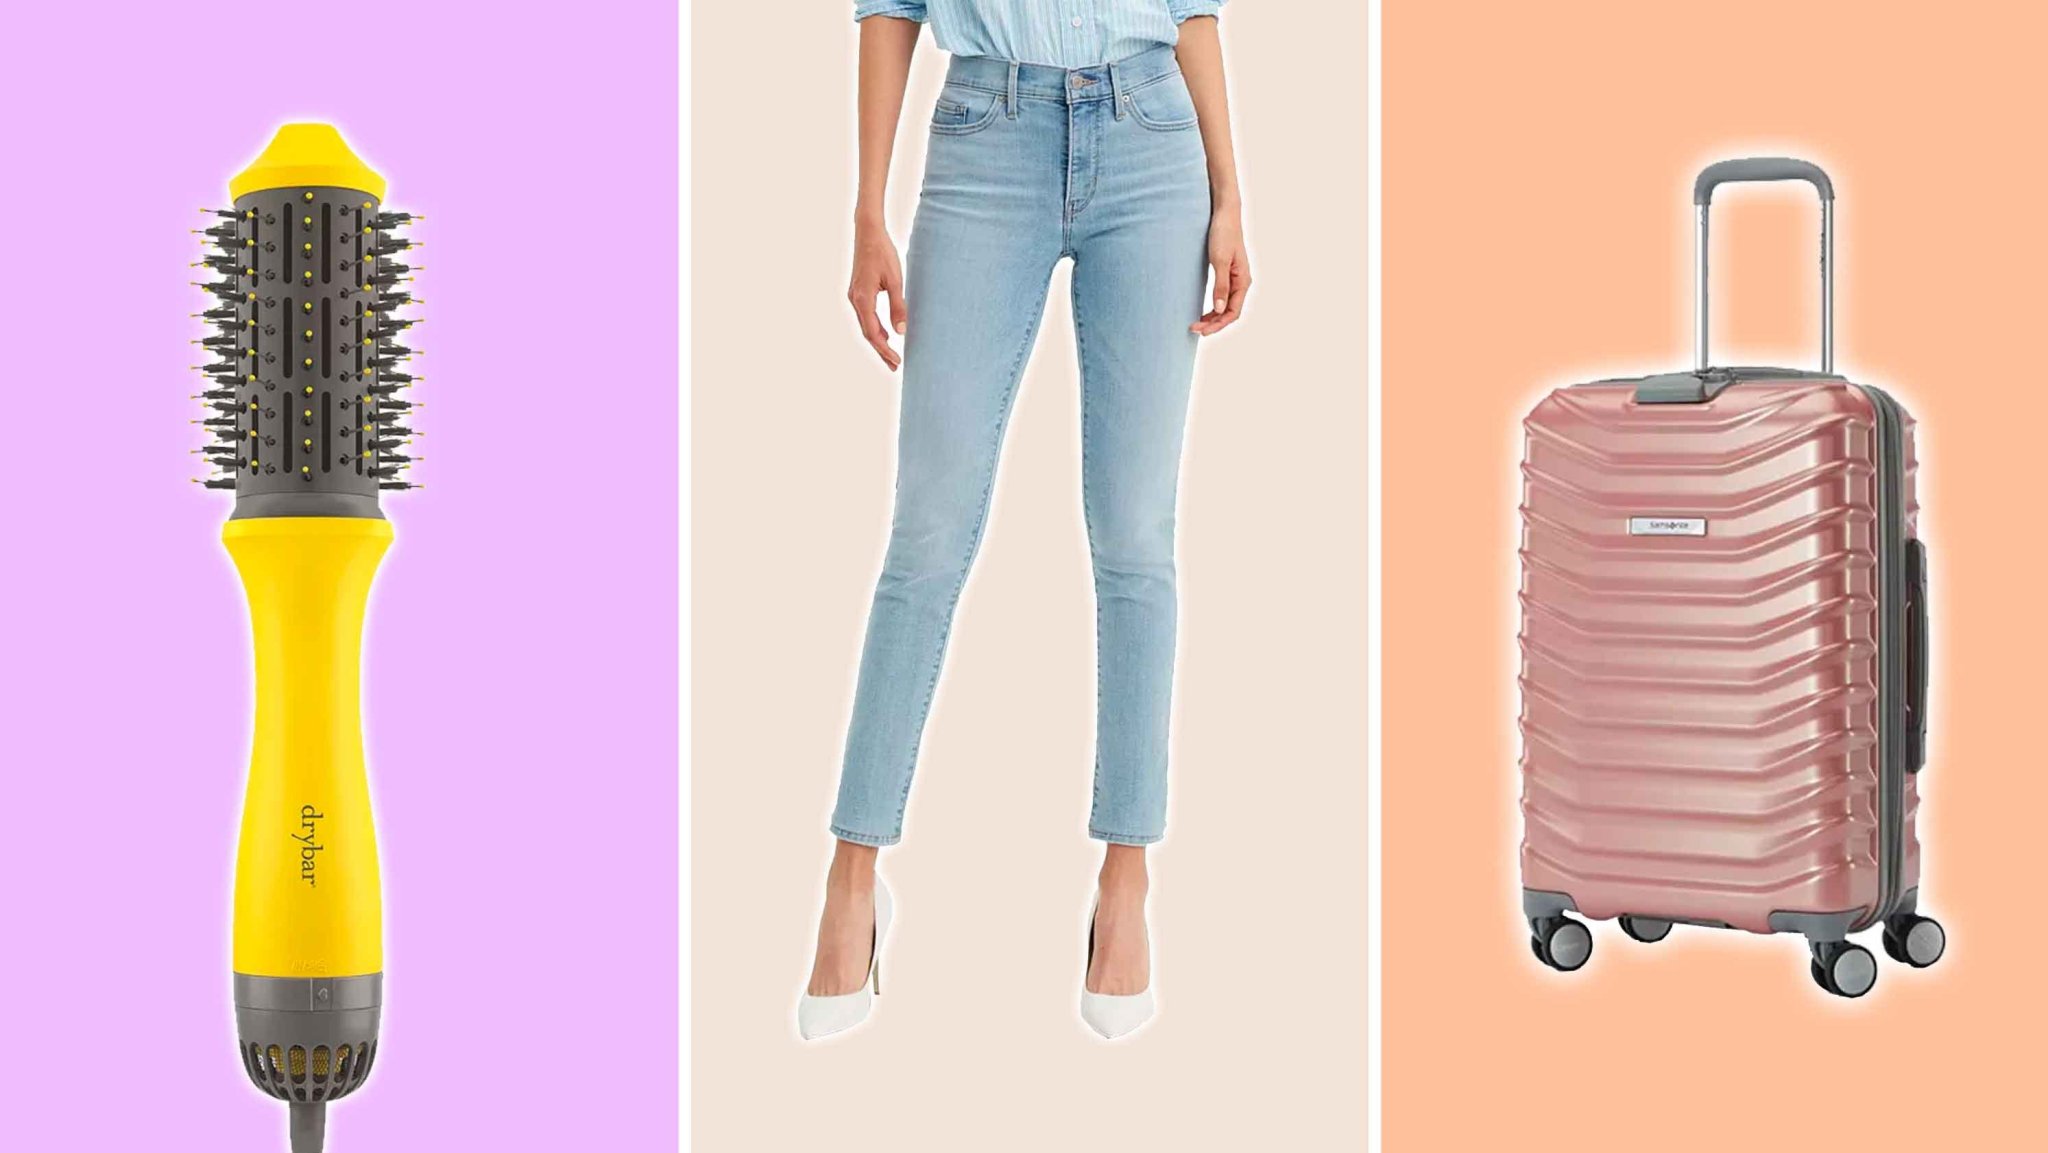 Save an extra 30% on luggage, bras and beauty at the Macy's Friends Family sale